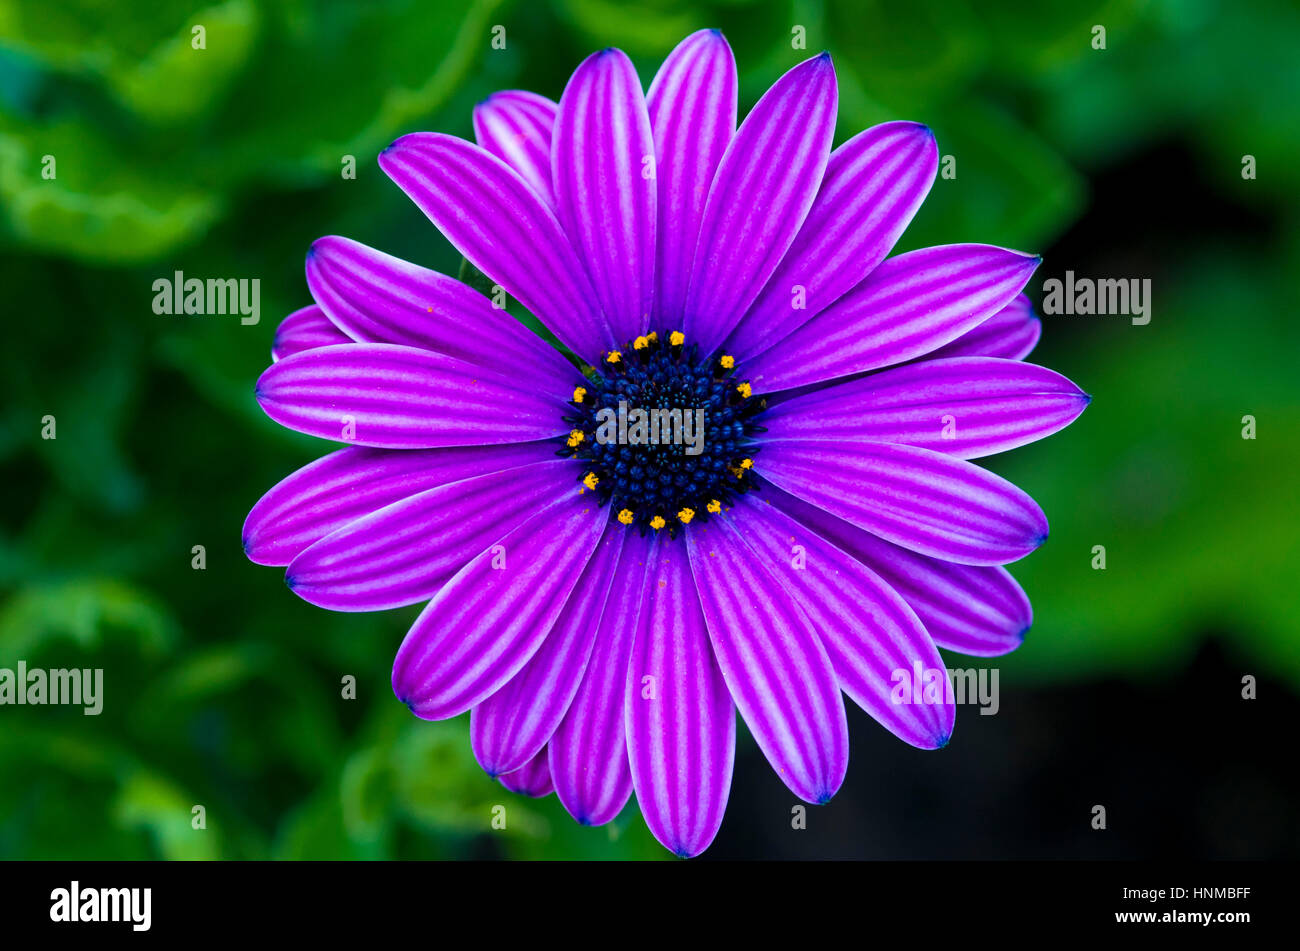 Colorful daisy flower in the garden. Stock Photo